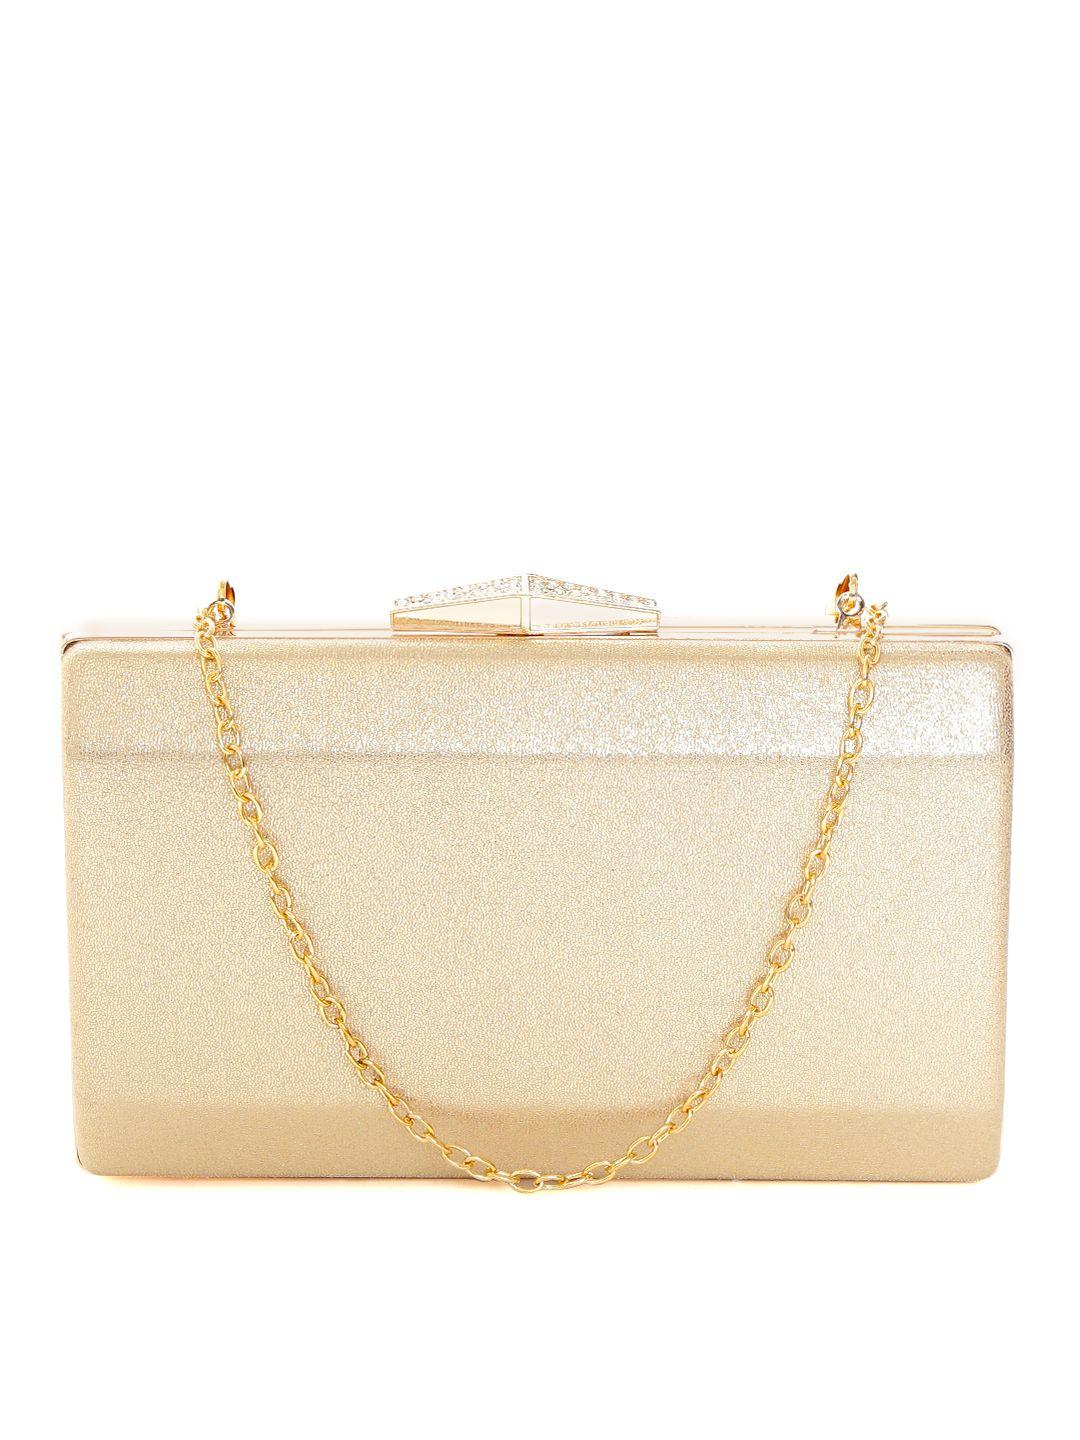 lino perros gold-toned shimmer box clutch with chain strap